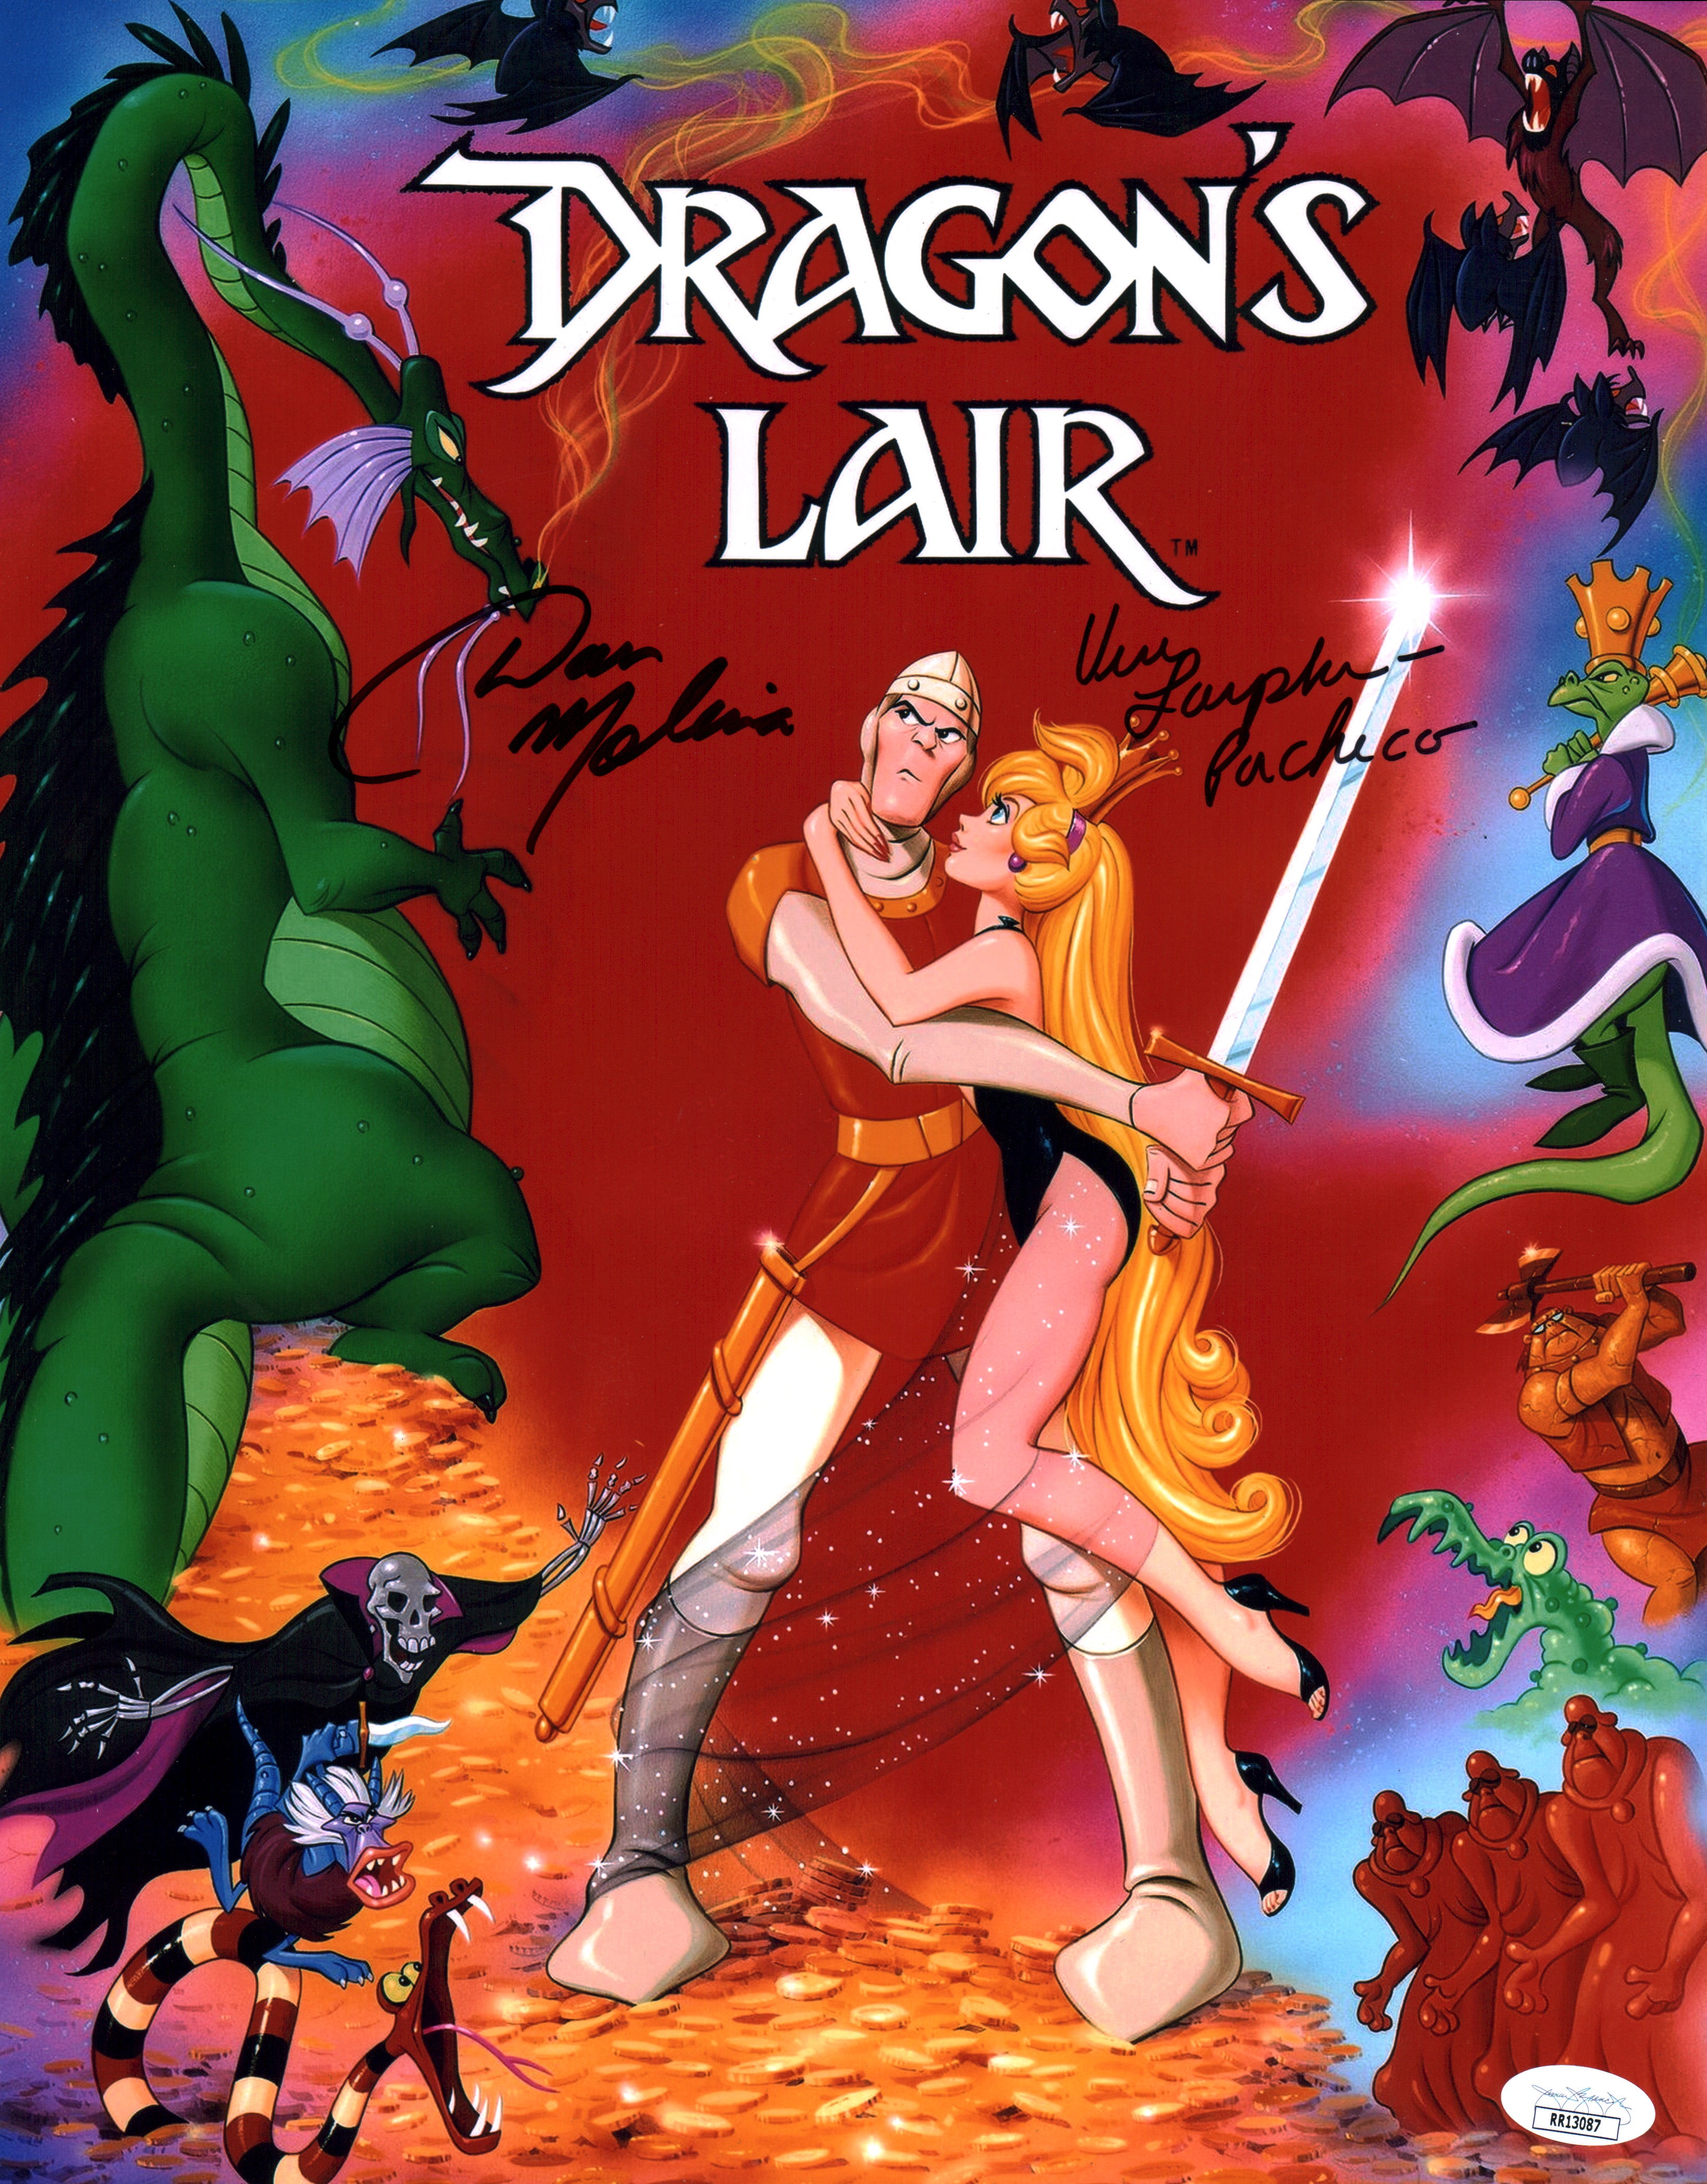 Dragon's Lair 11x14 Photo Poster x2 Signed Lanpher-Pacheco Molina JSA Certified Autograph